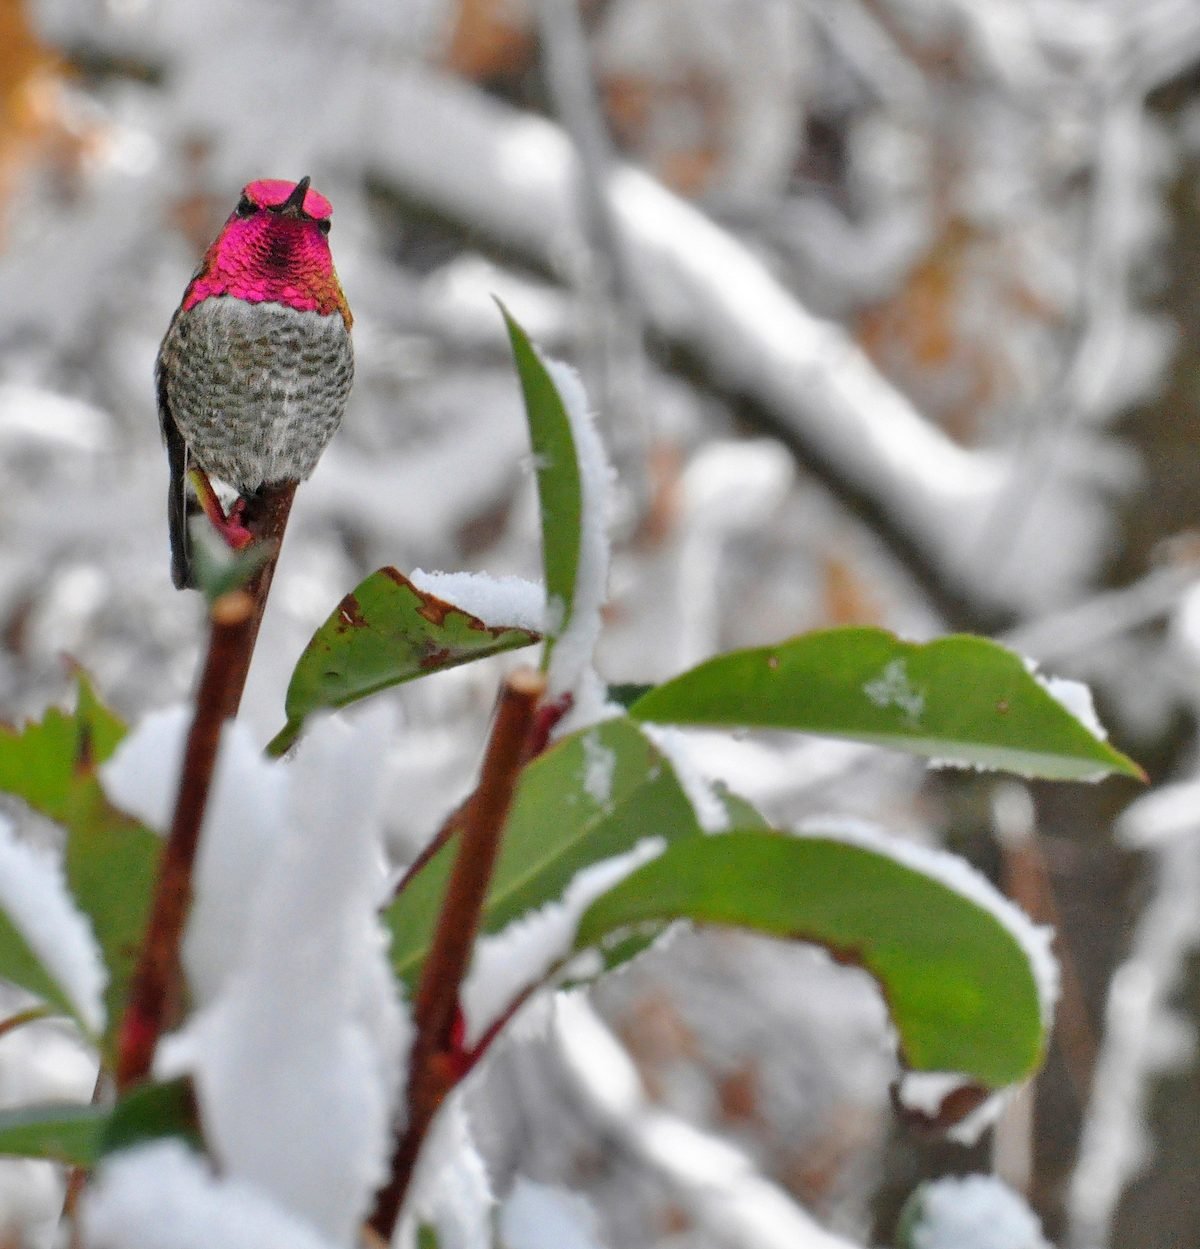 How Do Hummingbirds Survive Snow and Cold Weather?